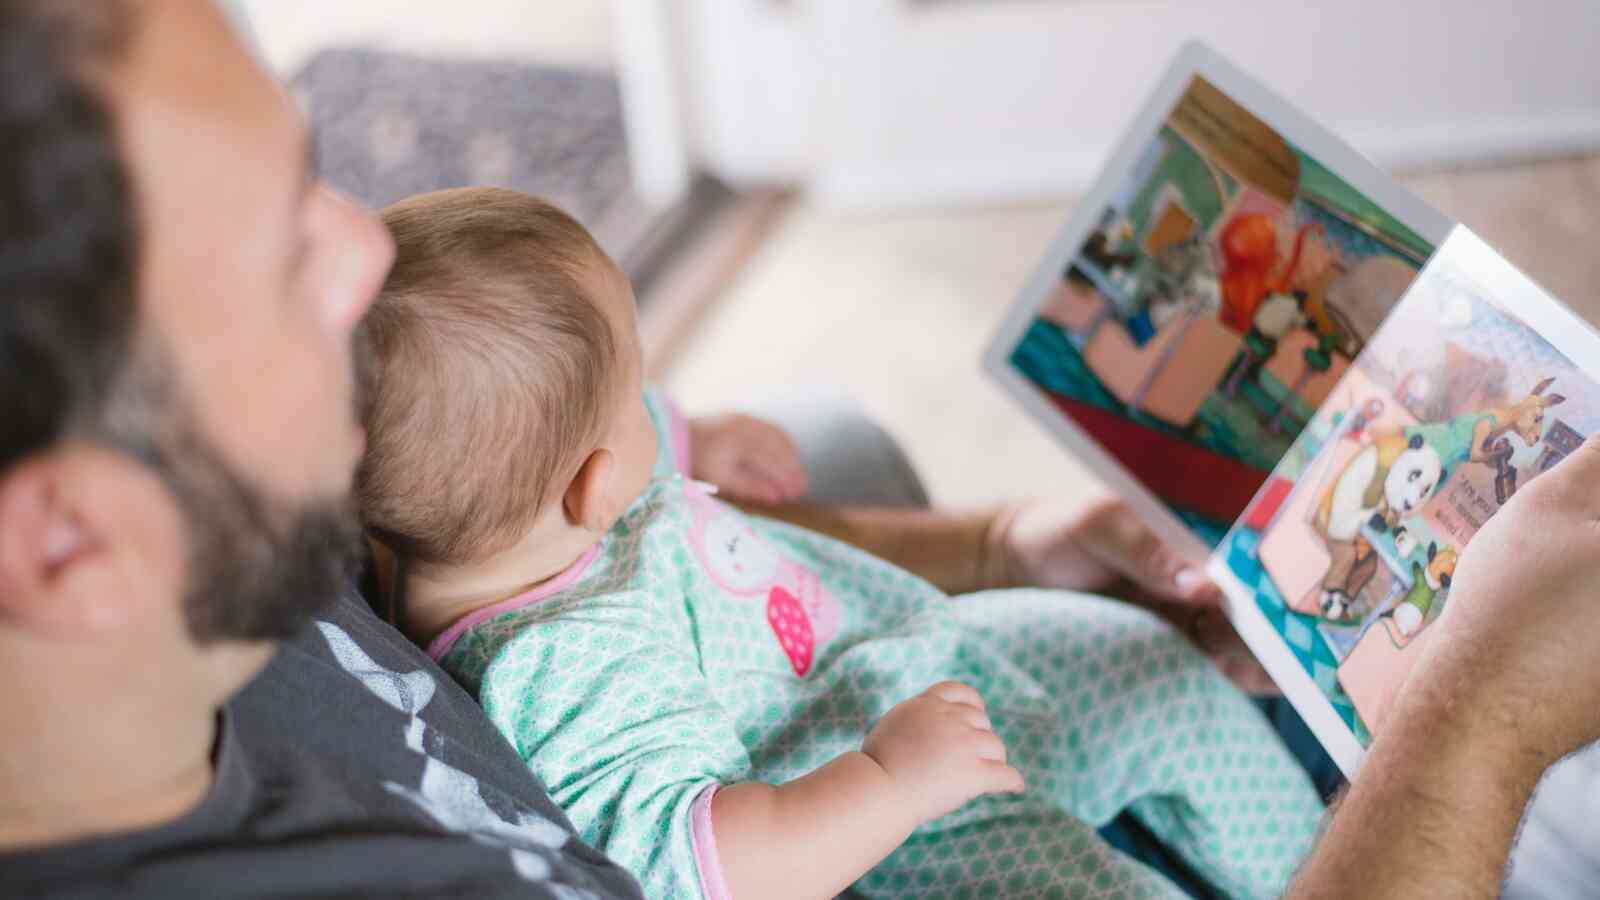 An adult male is seen sitting with a baby on his lap. The baby and adult male are looking at a book that he has open with colorful pictures. Both individuals have light skin.